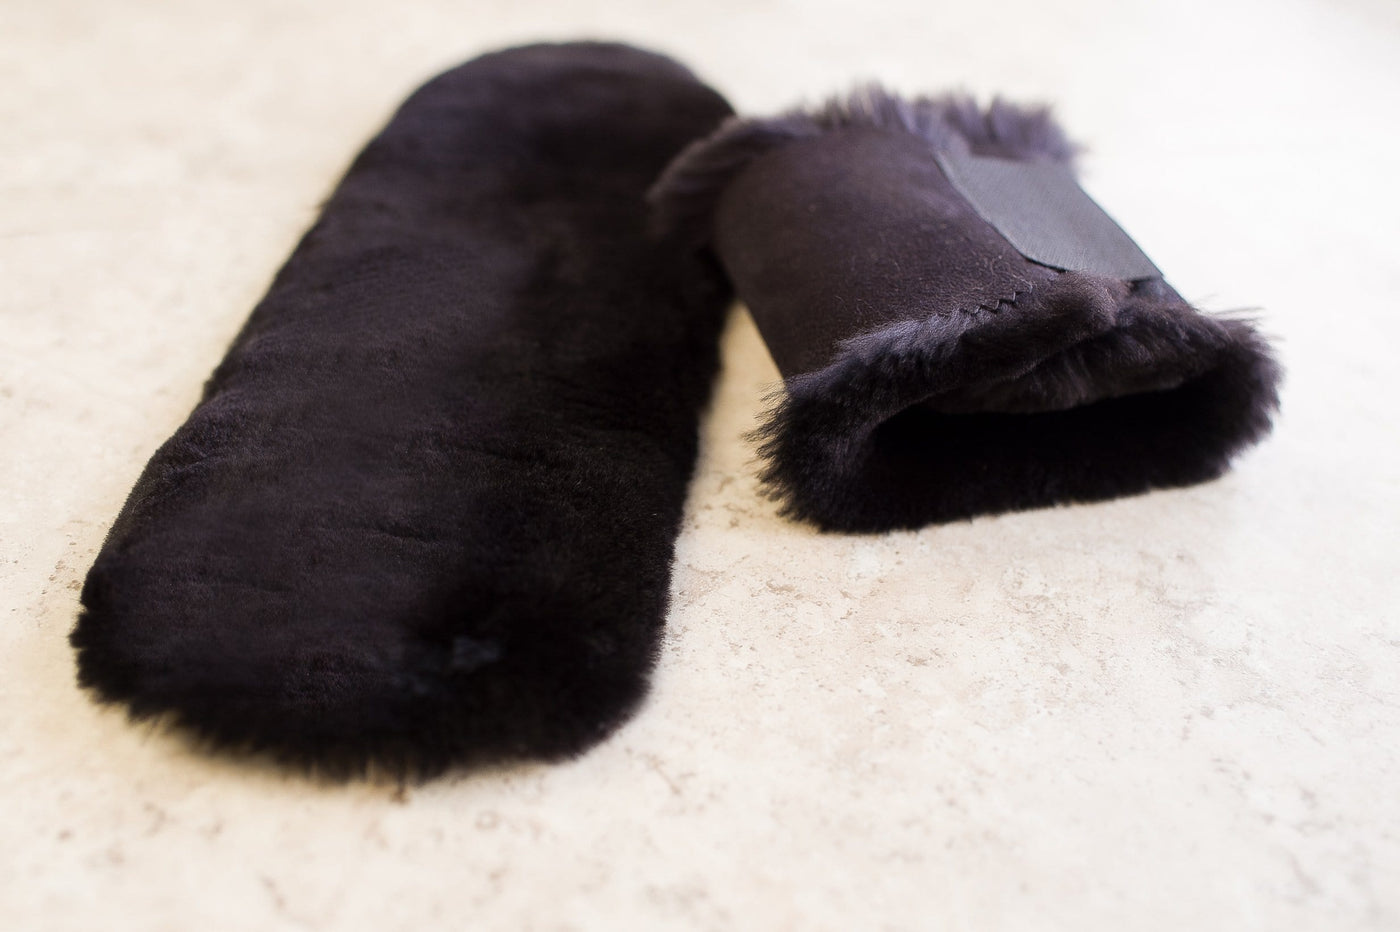 Natural and Reusable Canadian Fur Ankle Warmers - Black